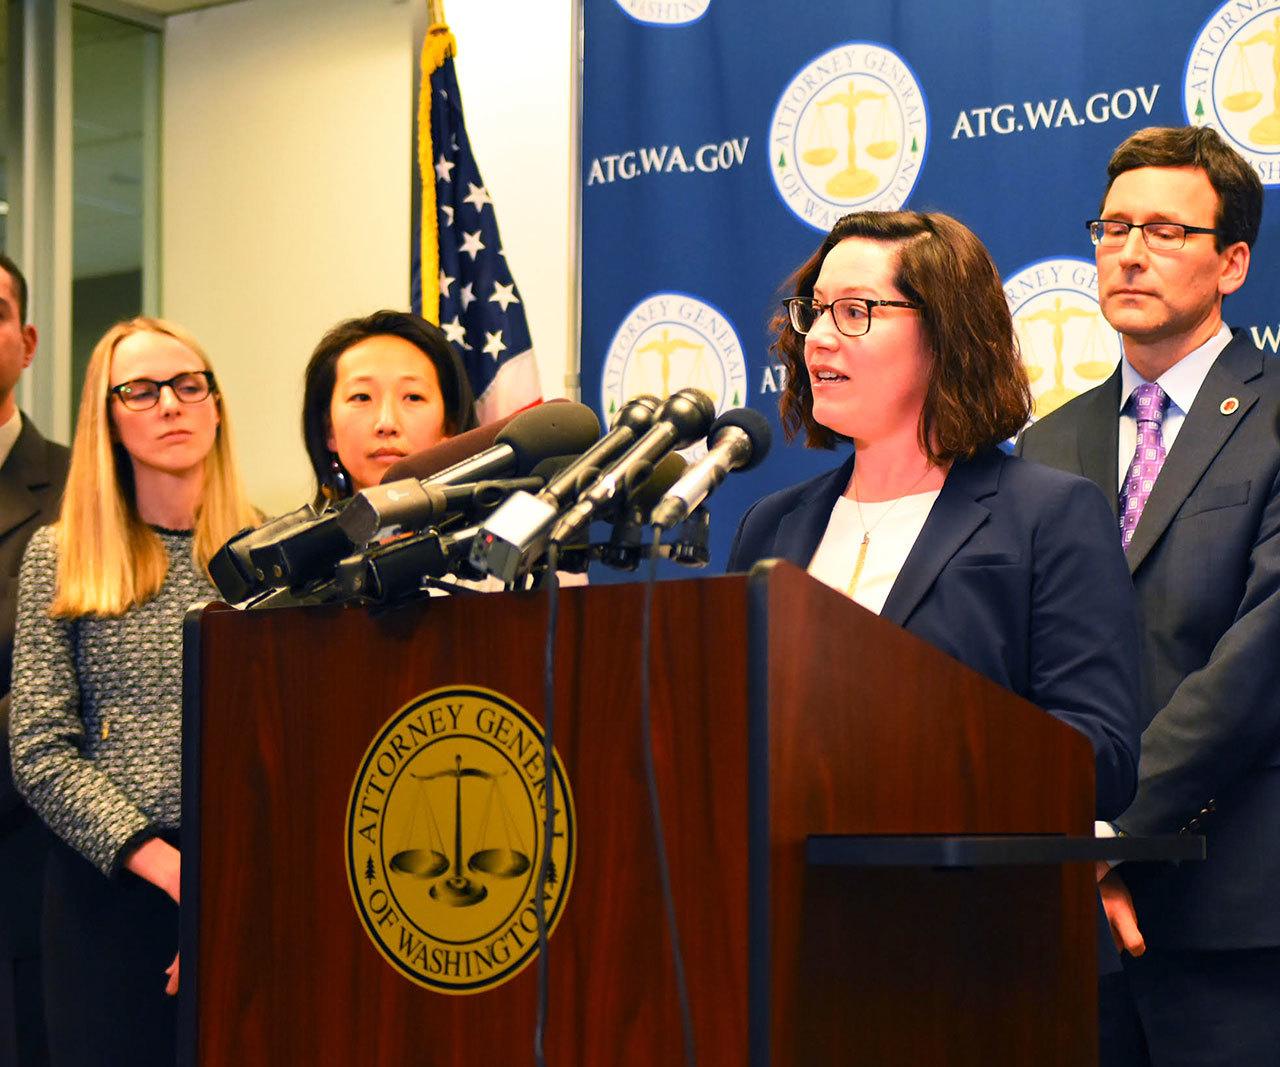 Colleen Melody (at podium) and Washington State Attorney General Bob Ferguson (back right) at a recent press conference. (Courtesy Photo)